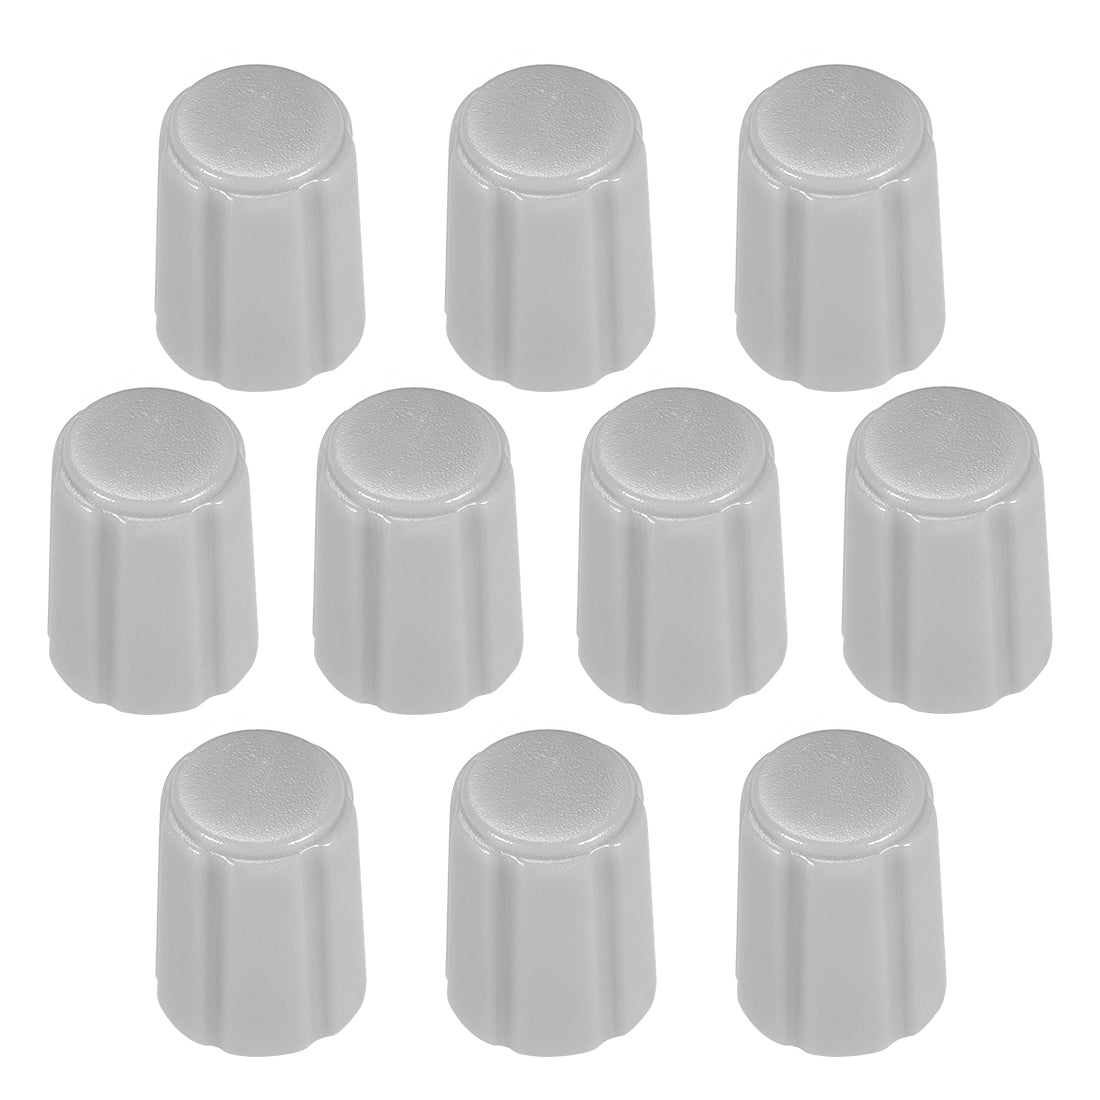 uxcell Uxcell 10pcs,4x6mm Potentiometer Control Knobs for Electric Guitar Grey